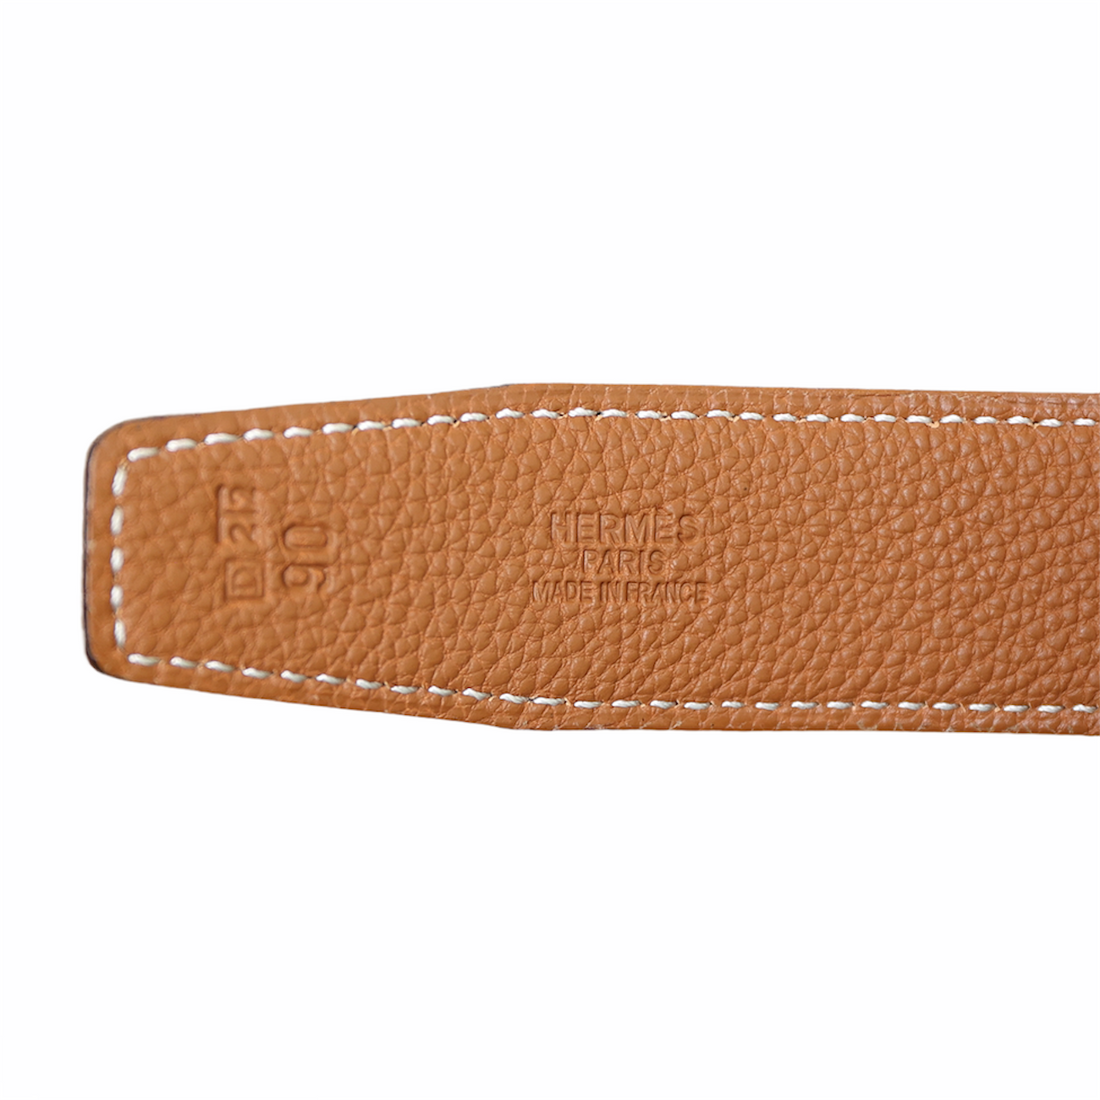 Hermès reversible belt "H" with hammered gold clasp 30mm in black and cognac